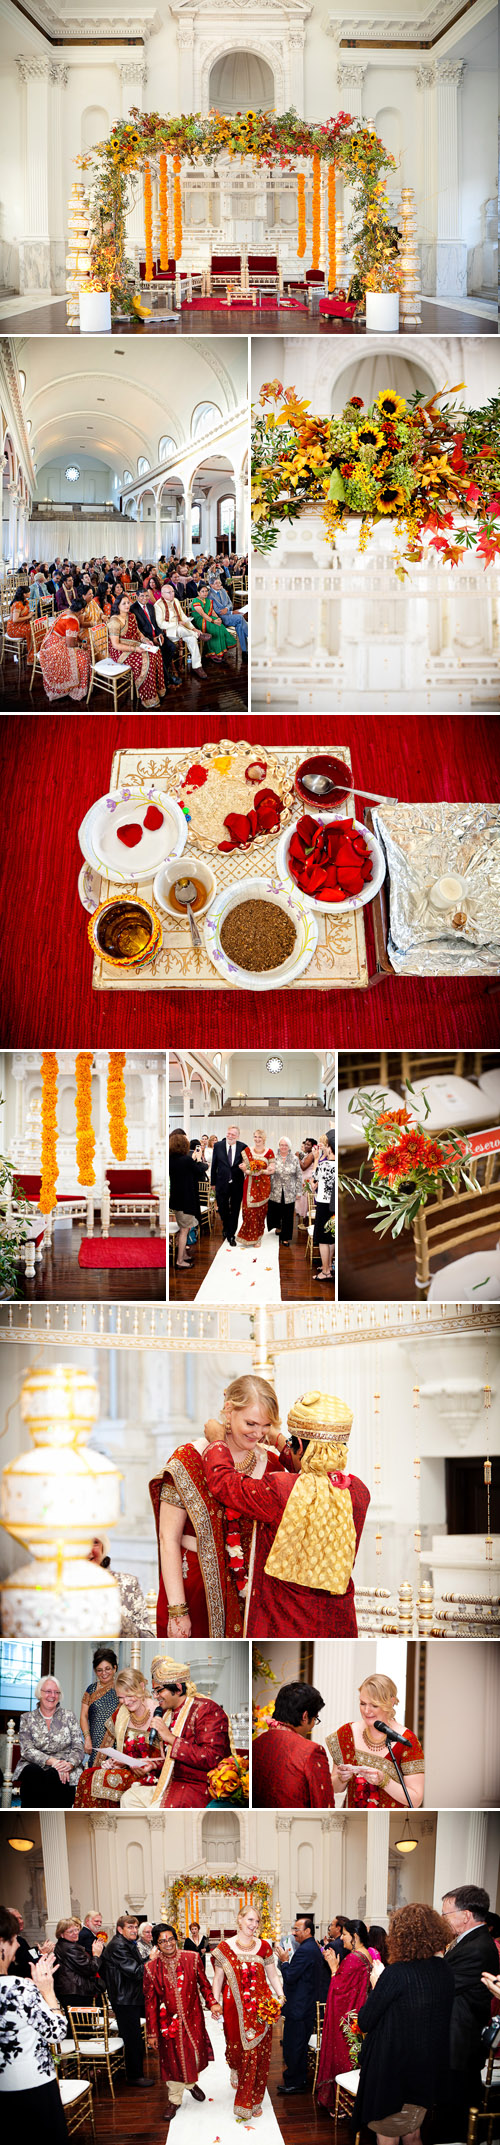 modern Indian wedding at Vibiana in Los Angeles, photos by Callaway Gable Photography